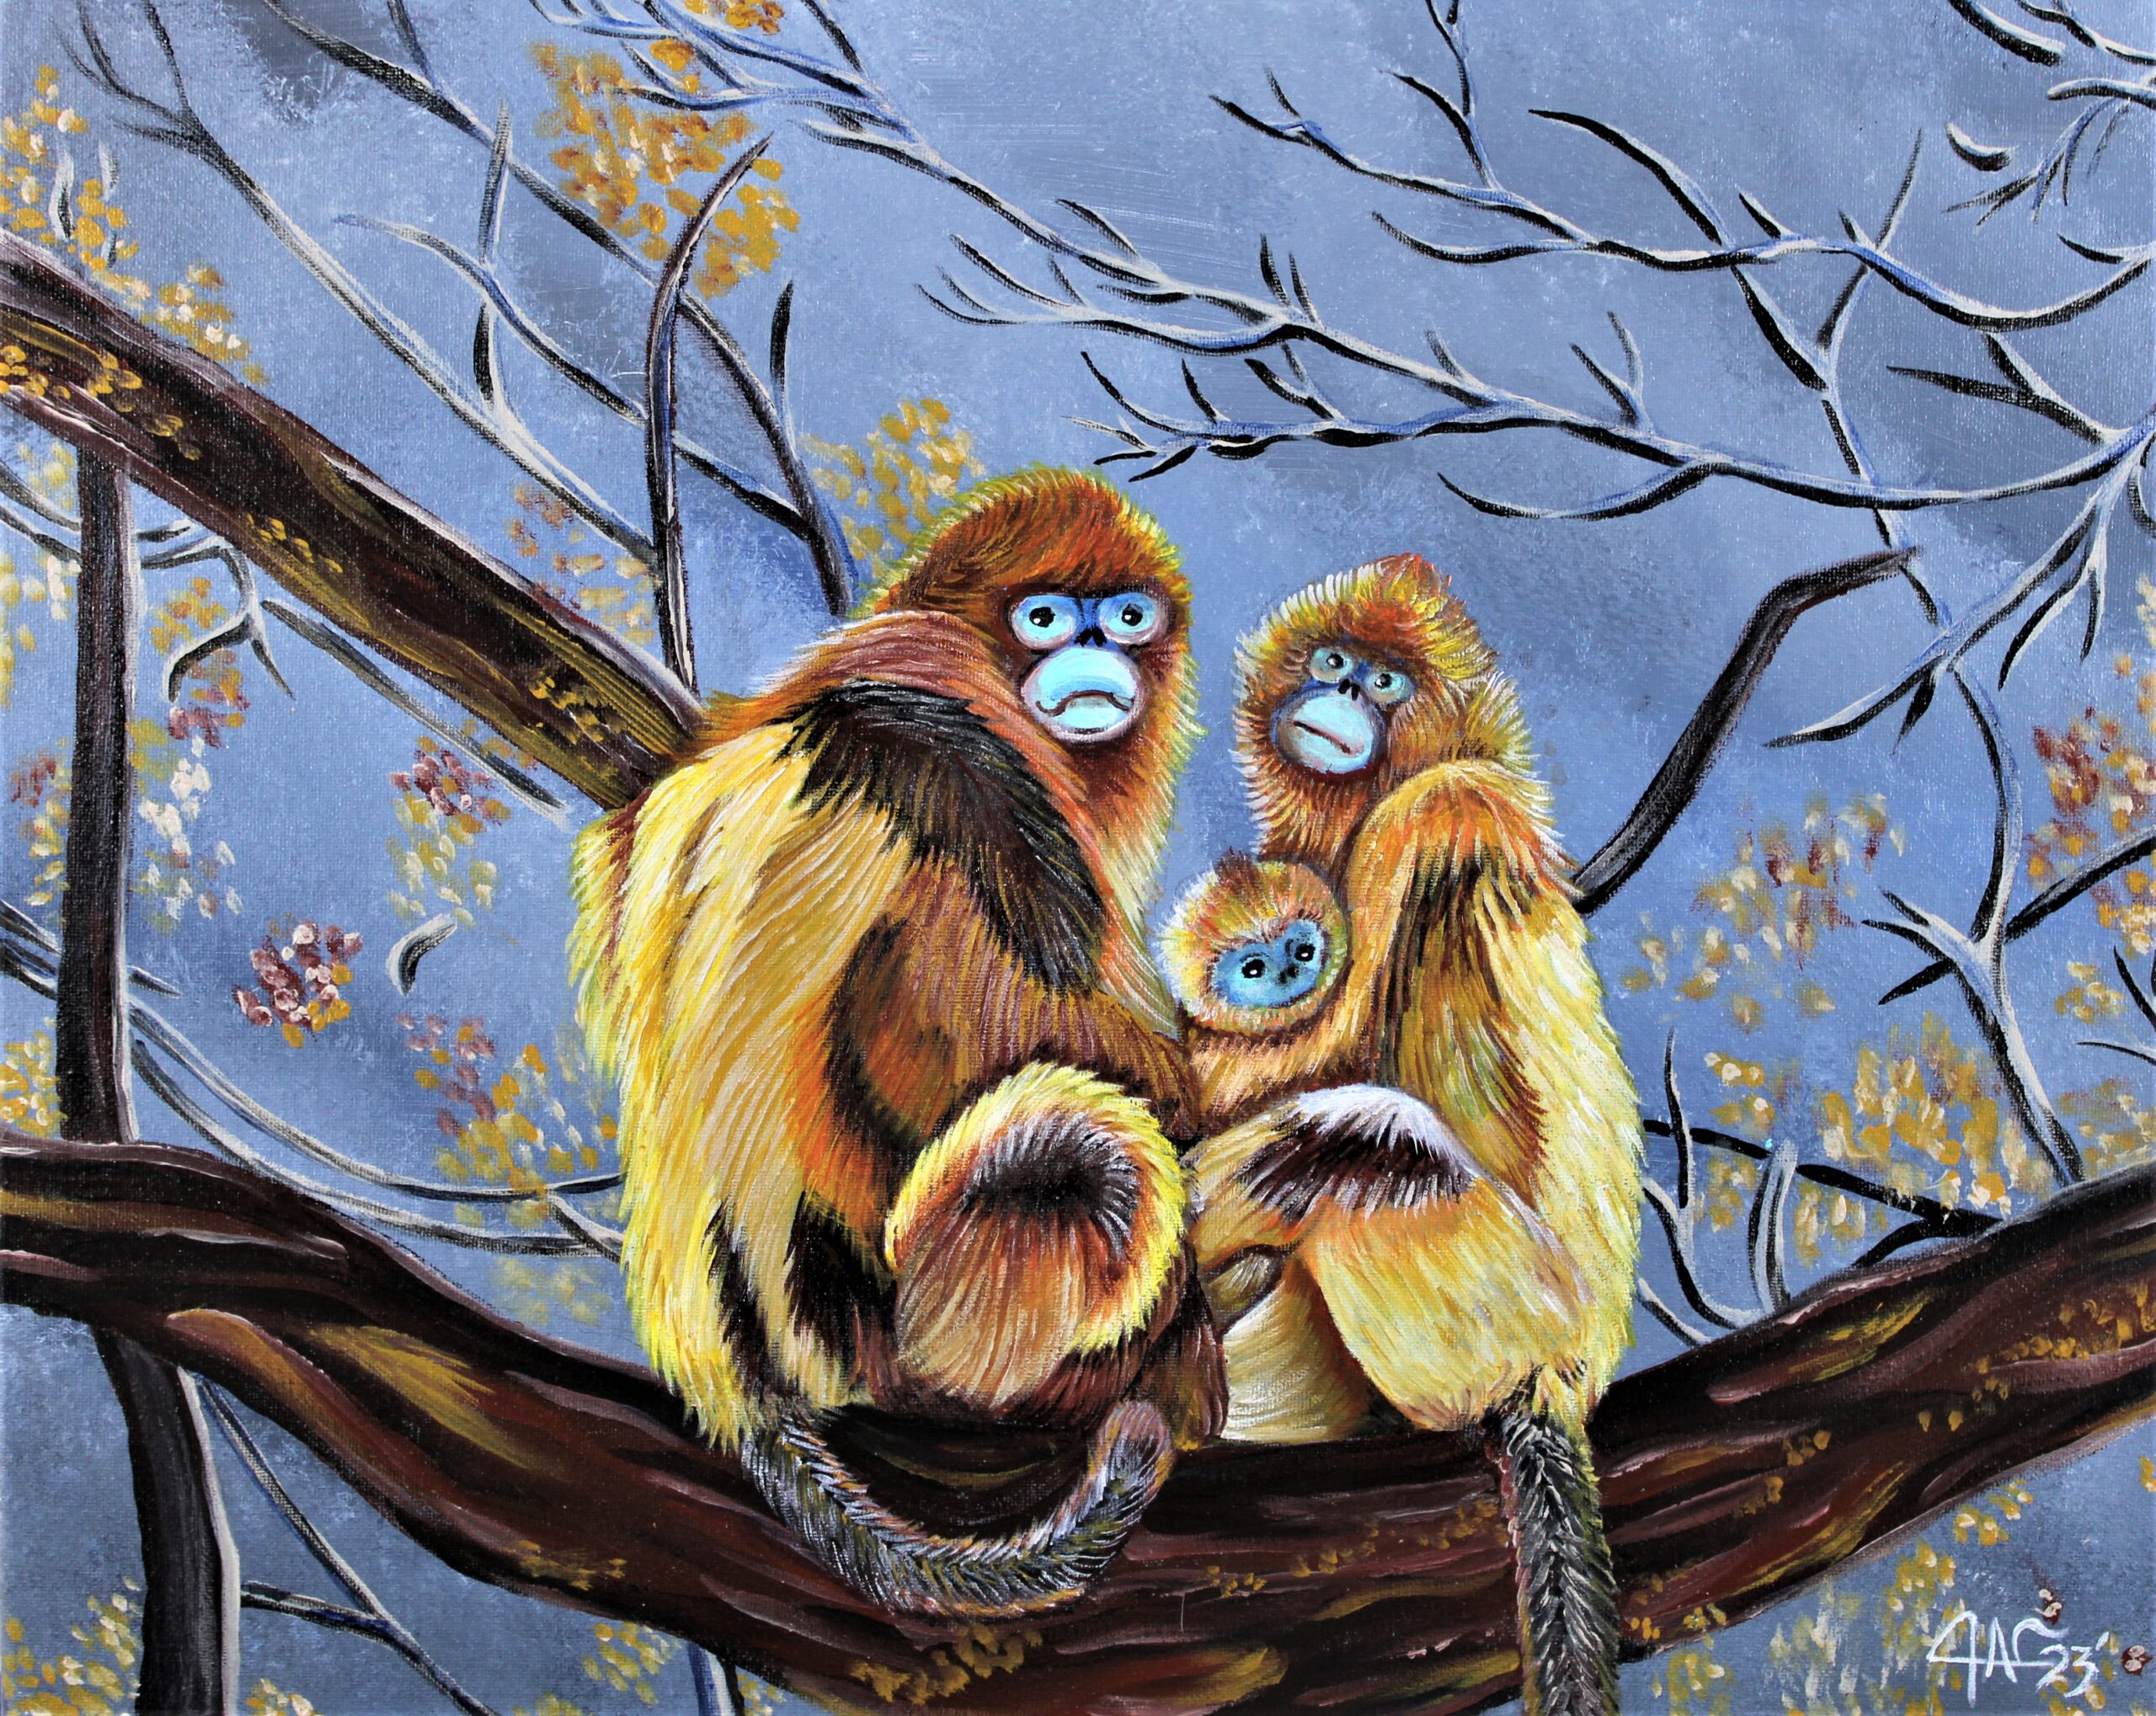 Family - Golden Snub Nose Monkeys Acrylic Painting By The GYPSY